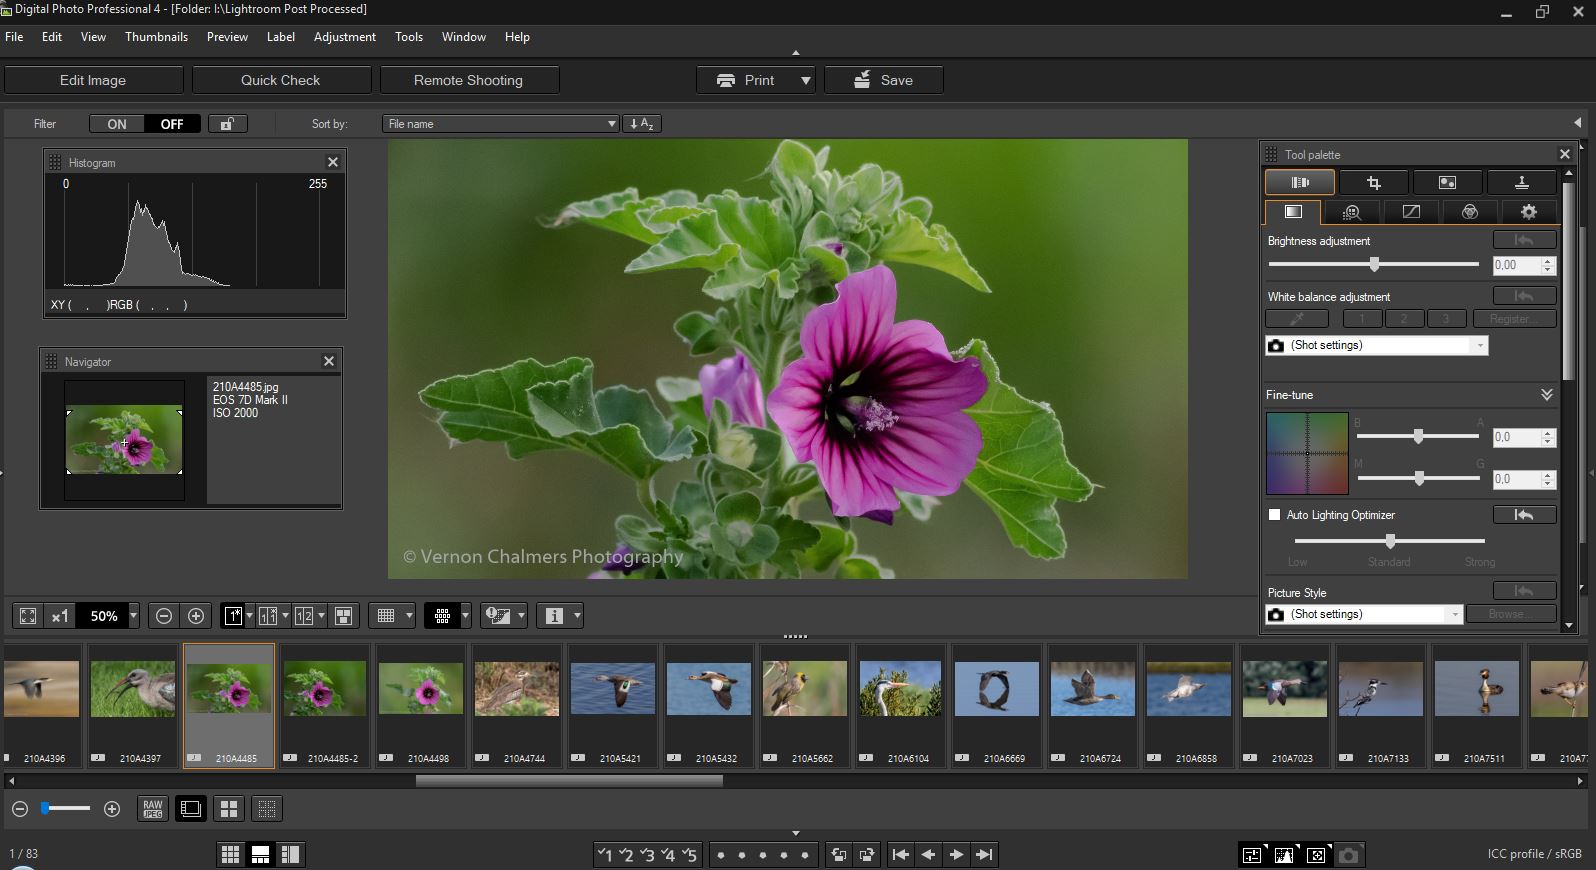 Canon digital photo professional download free for mac